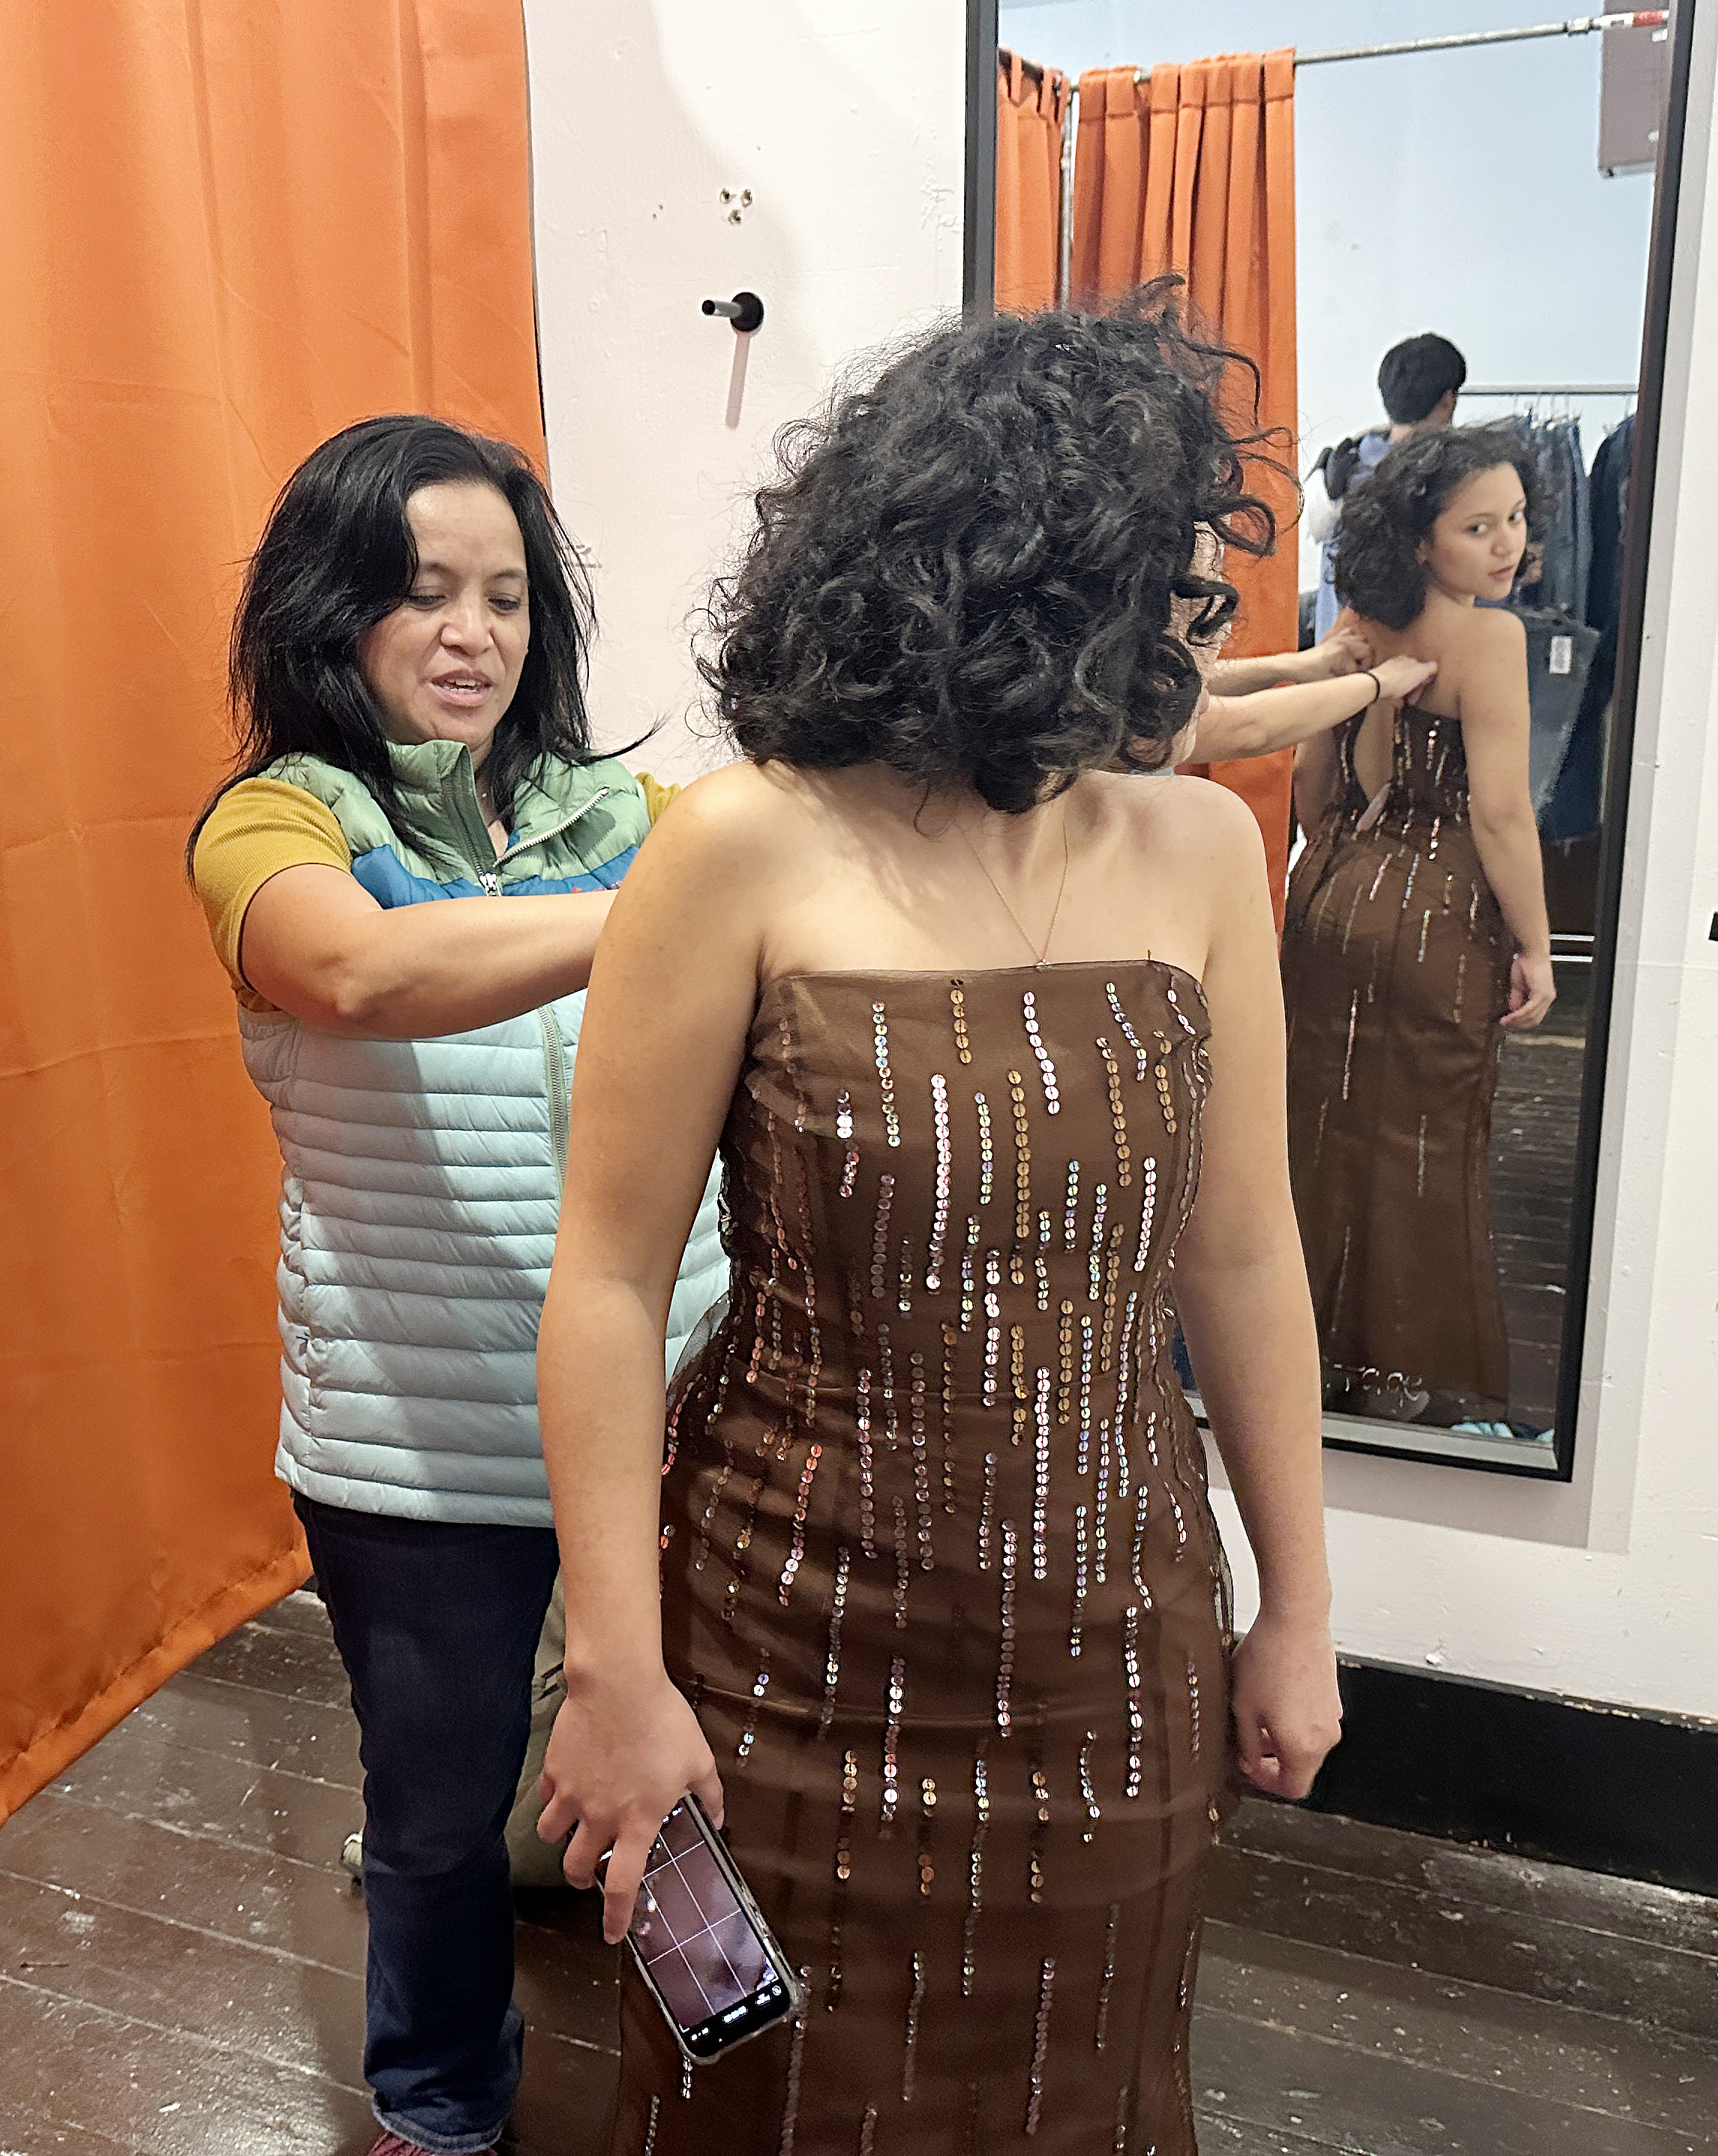 A woman is assisting another in fitting a sequined dress, viewed in a mirror within a dressing room.